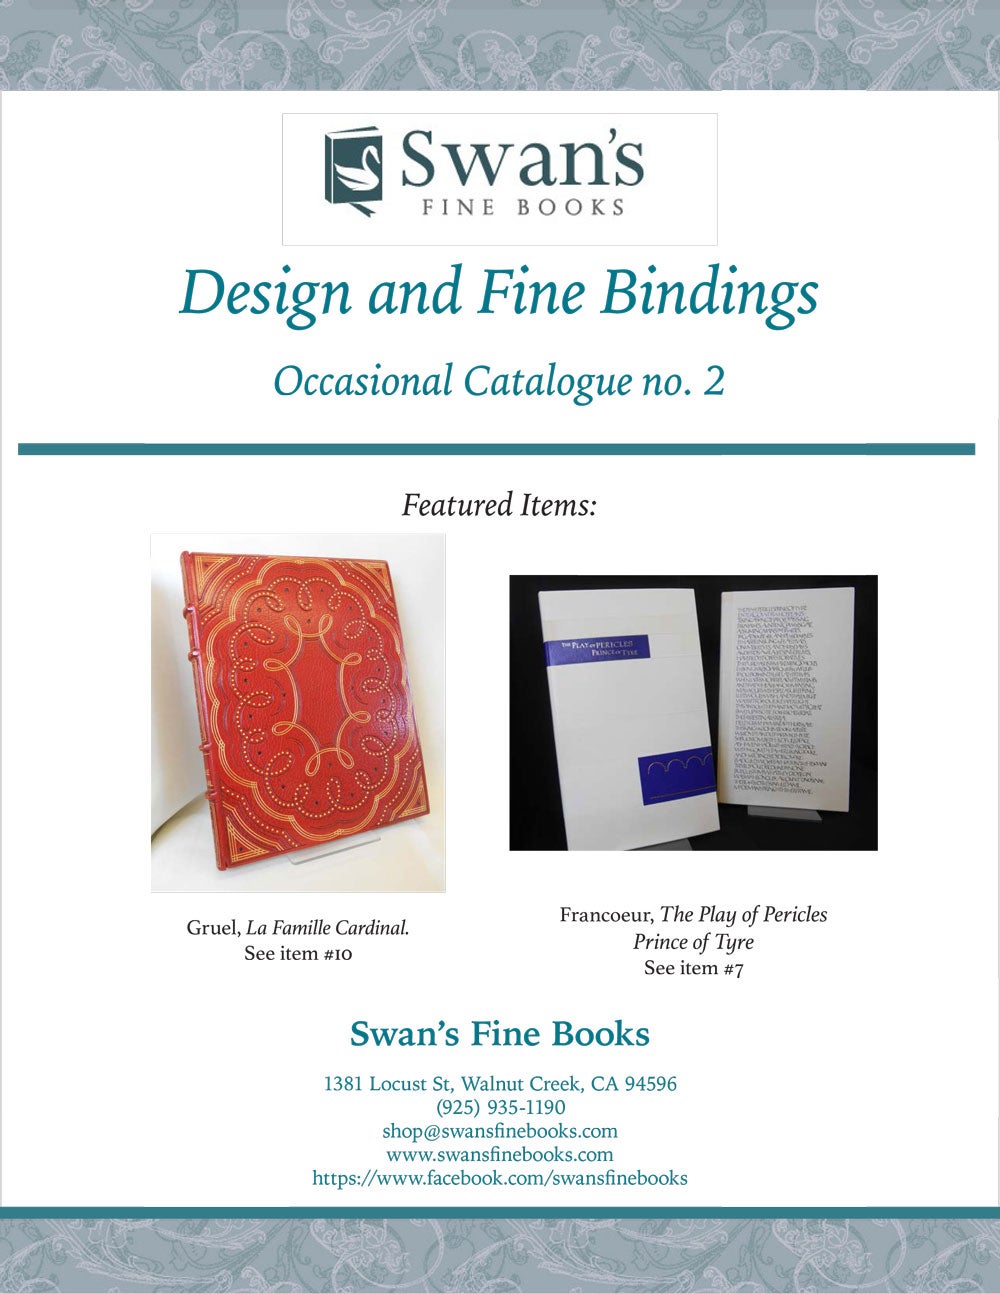 Catalogue 2 – Design and Fine Bindings